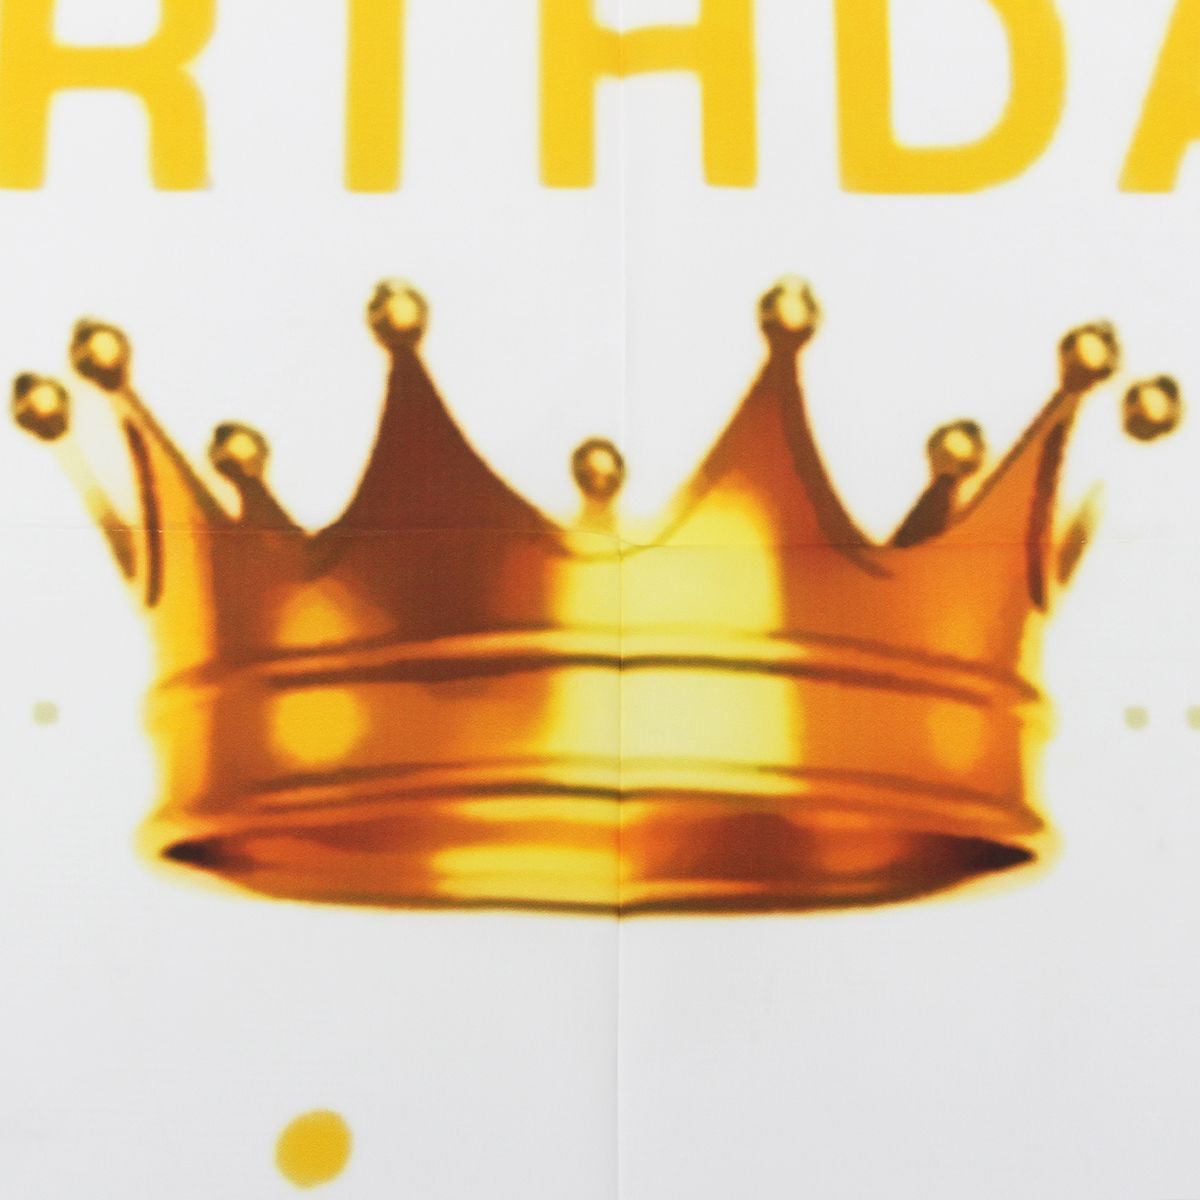 7x5FT-Golden-Crown-Pink-Birthday-Theme-Photography-Backdrop-Studio-Prop-Background-1405466